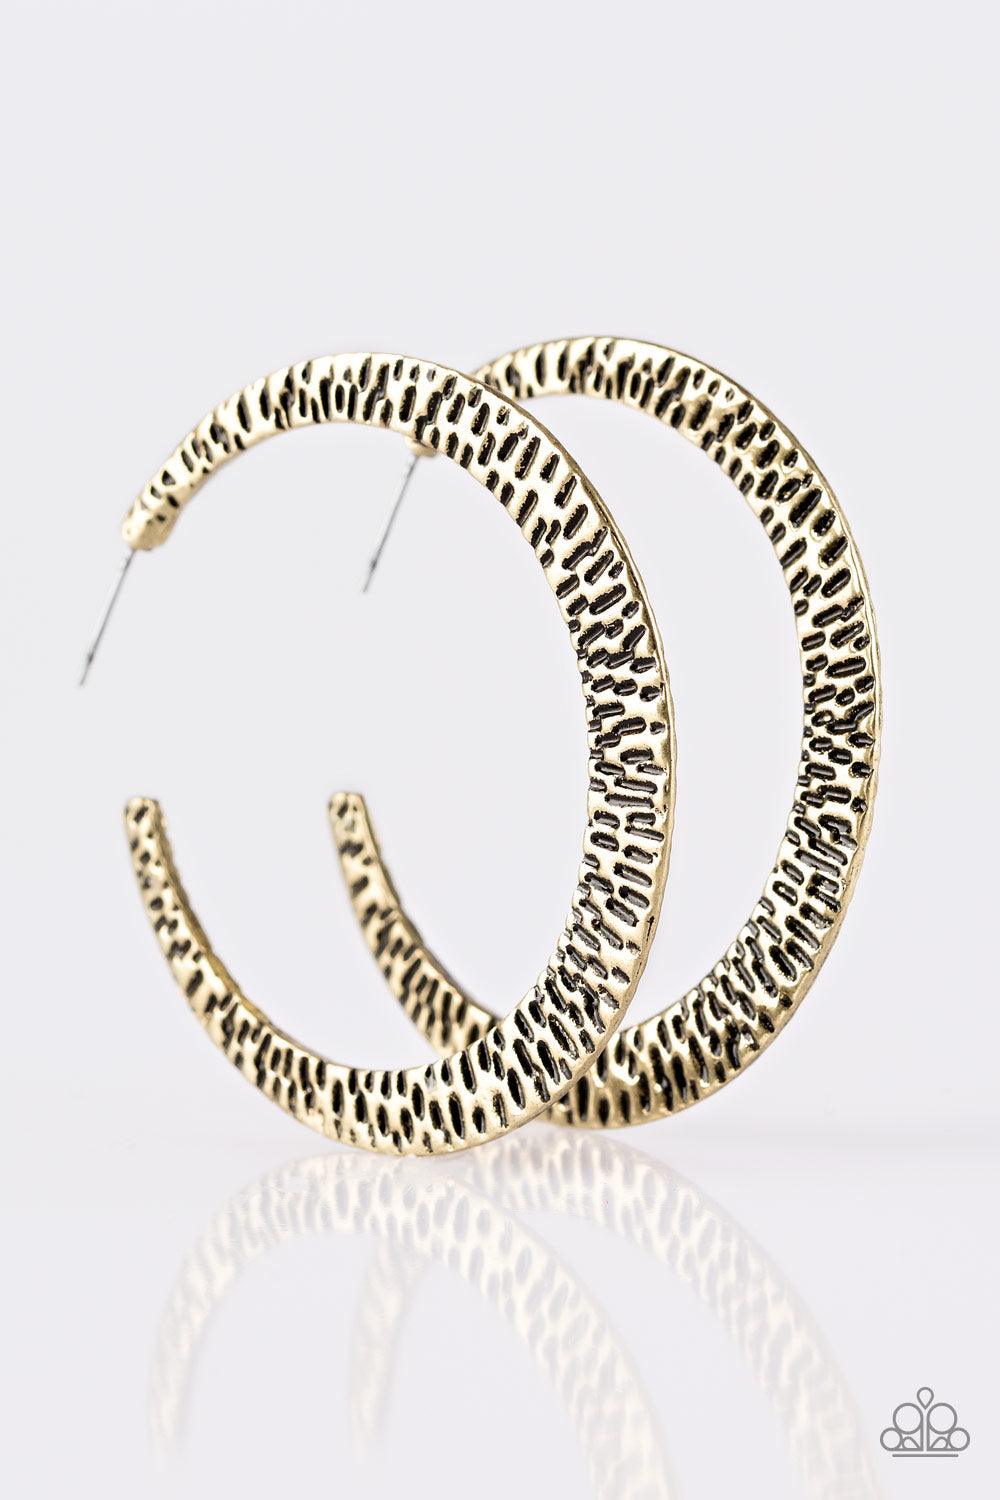 Paparazzi Accessories BEAST Friends Forever - Brass Delicately hammered in shimmery textures, a glistening brass hoop curls around the ear for a fierce fashion. Earring attaches to a standard post fitting. Hoop measures 2" in diameter. Sold as one pair of